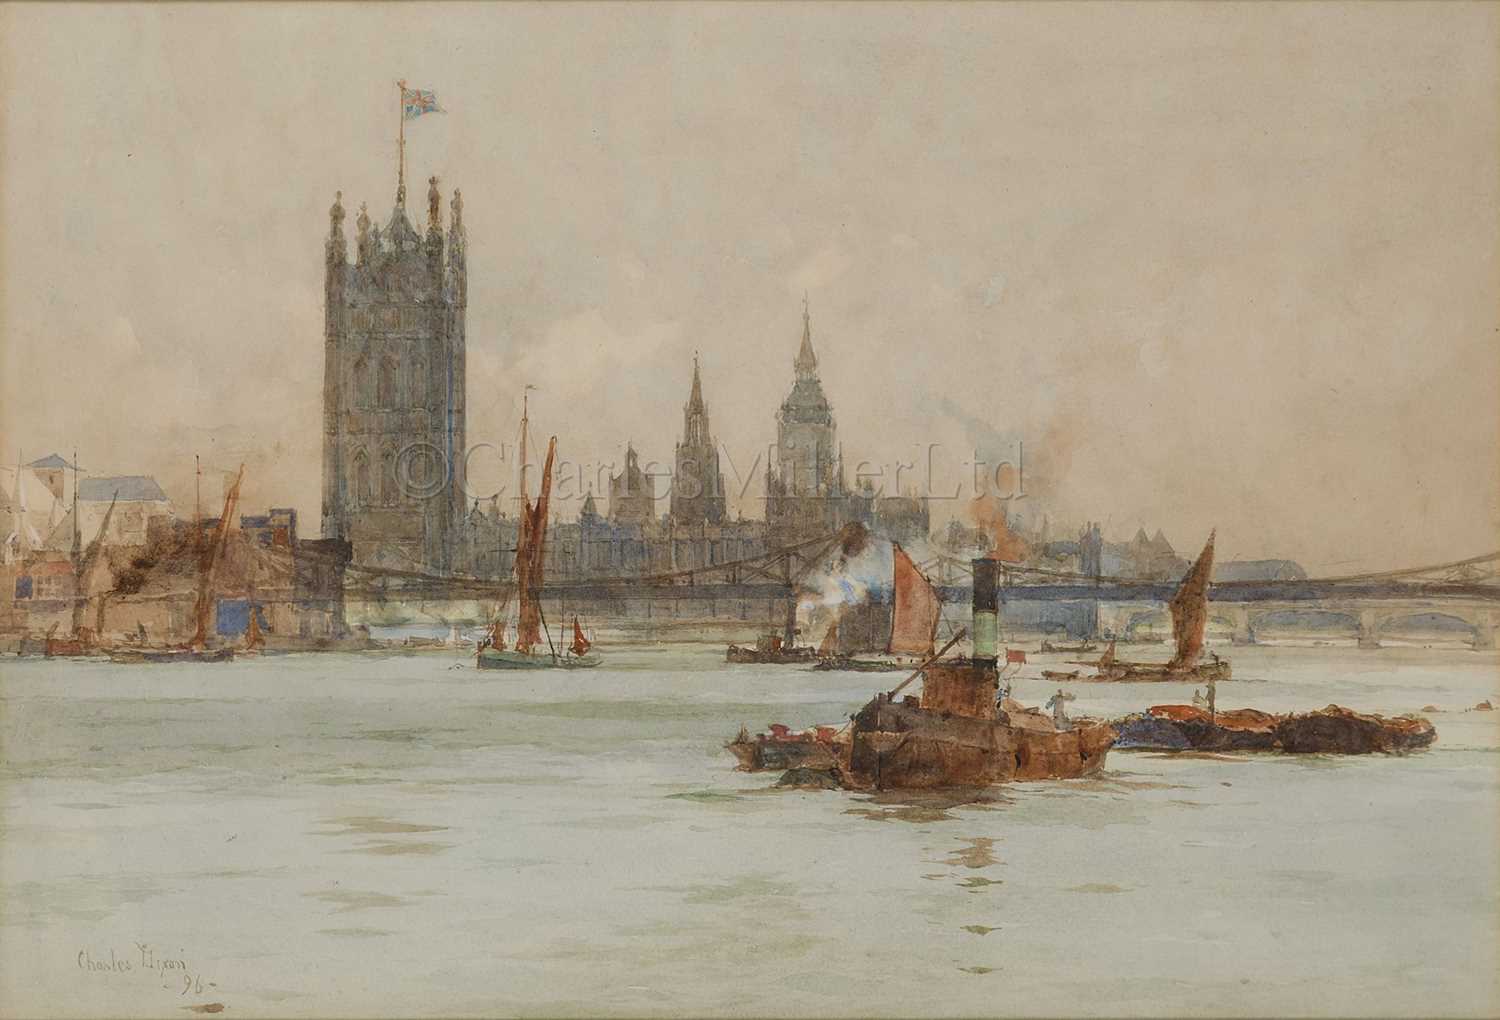 Lot 8 - CHARLES DIXON (BRITISH, 1872-1934): Shipping on the River Thames with the Palace of Westminster and Lambeth Bridge beyond